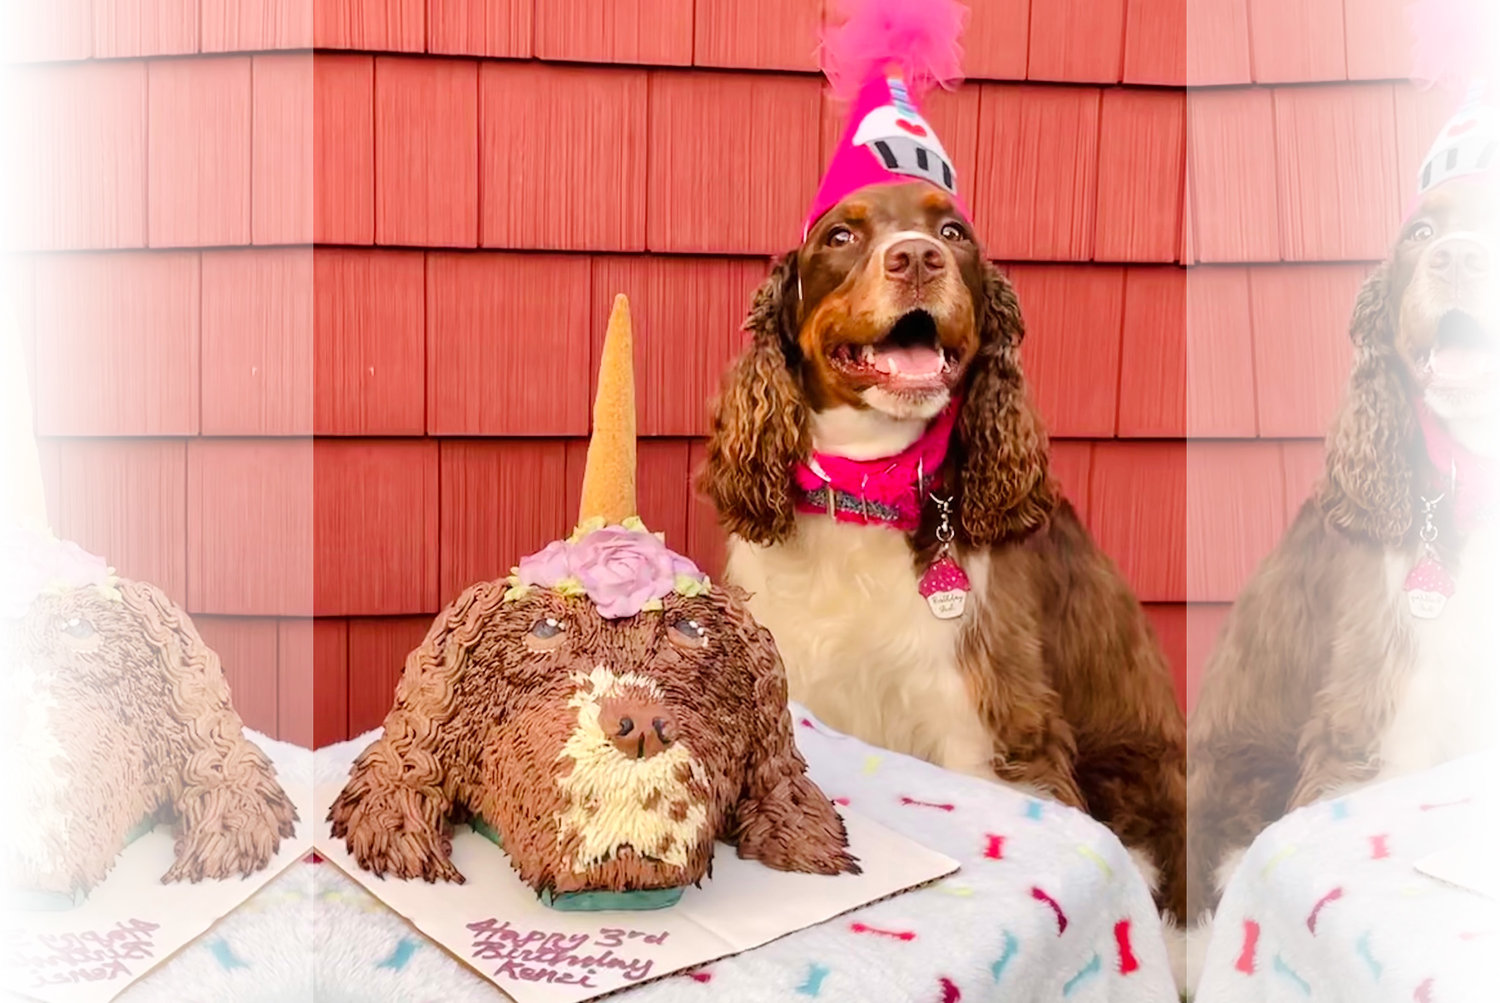 This pooch’s birthday celebration isn’t complete without a look-alike cake